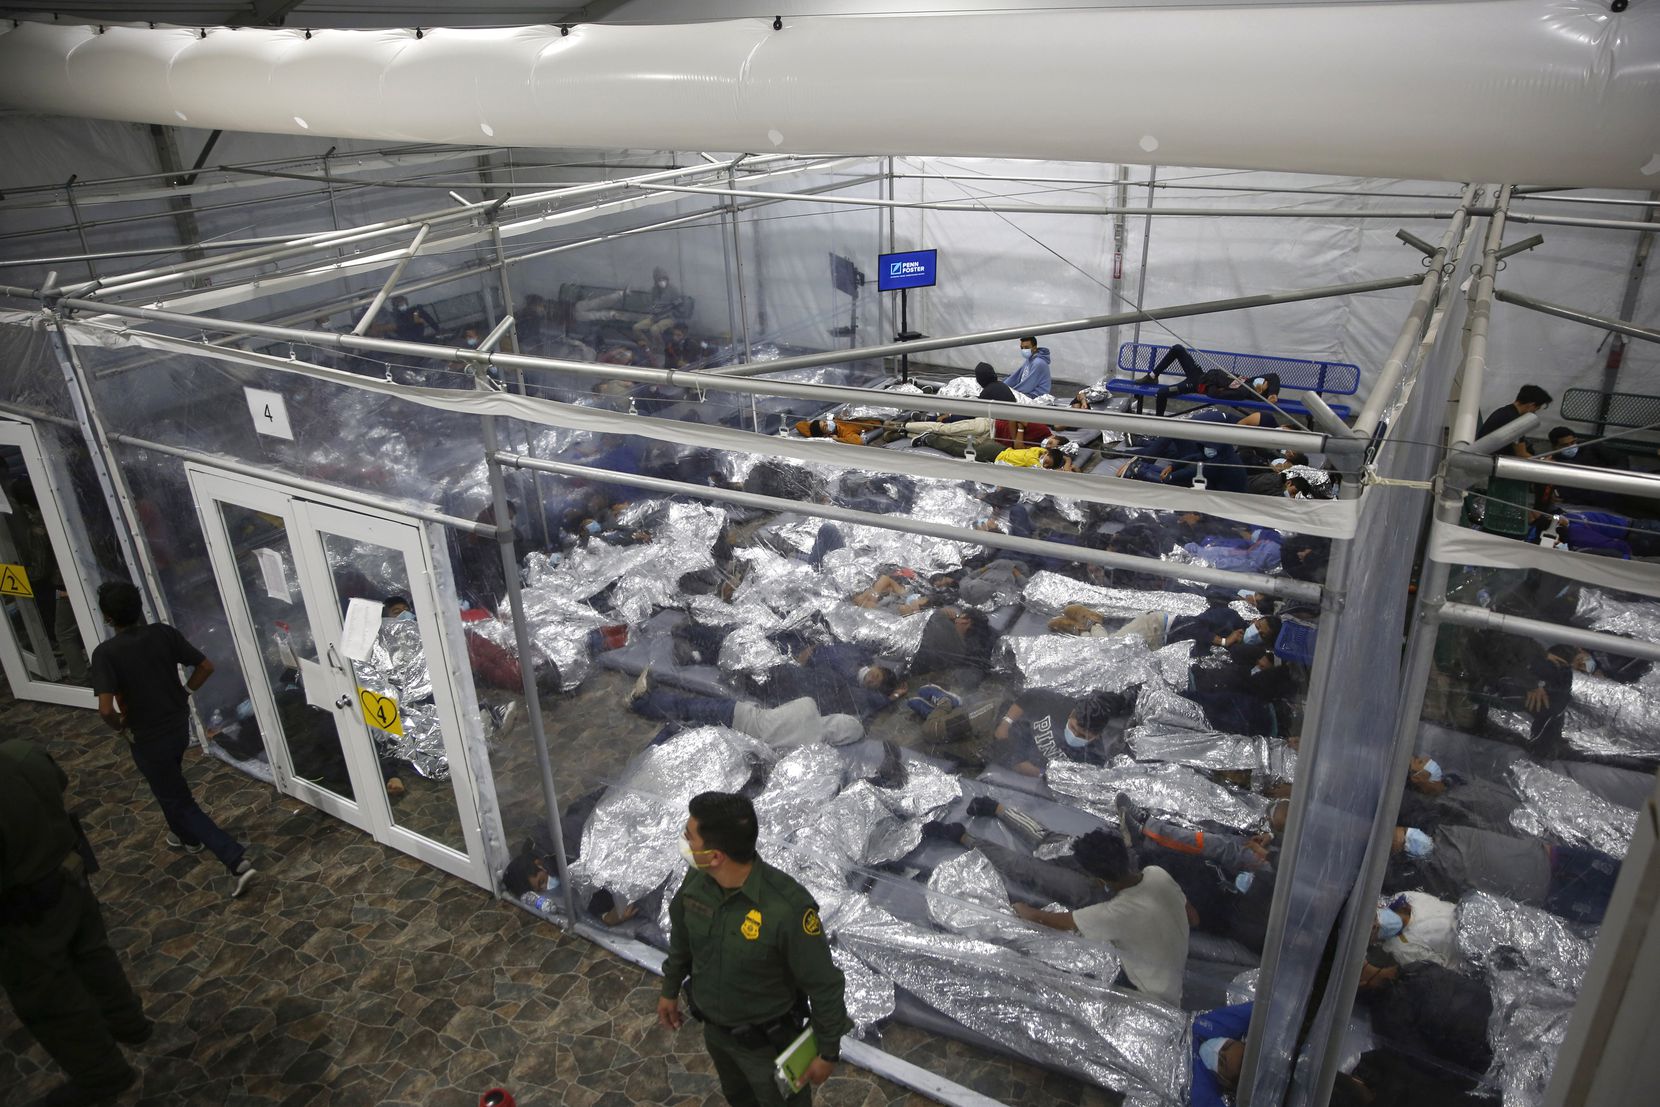 FILE - In this March 30, 2021, file photo, young minors lie inside a pod at the Donna Department of Homeland Security holding facility, the main detention center for unaccompanied children in the Rio Grande Valley run by U.S. Customs and Border Protection (CBP), in Donna, Texas. U.S. officials are scrambling to handle a dramatic spike in children crossing the U.S.-Mexico border alone. It's lead to a massive expansion in emergency facilities to house them as more kids arrive than can be released to close relatives in the United States. (AP Photo/Dario Lopez-Mills, Pool, File)